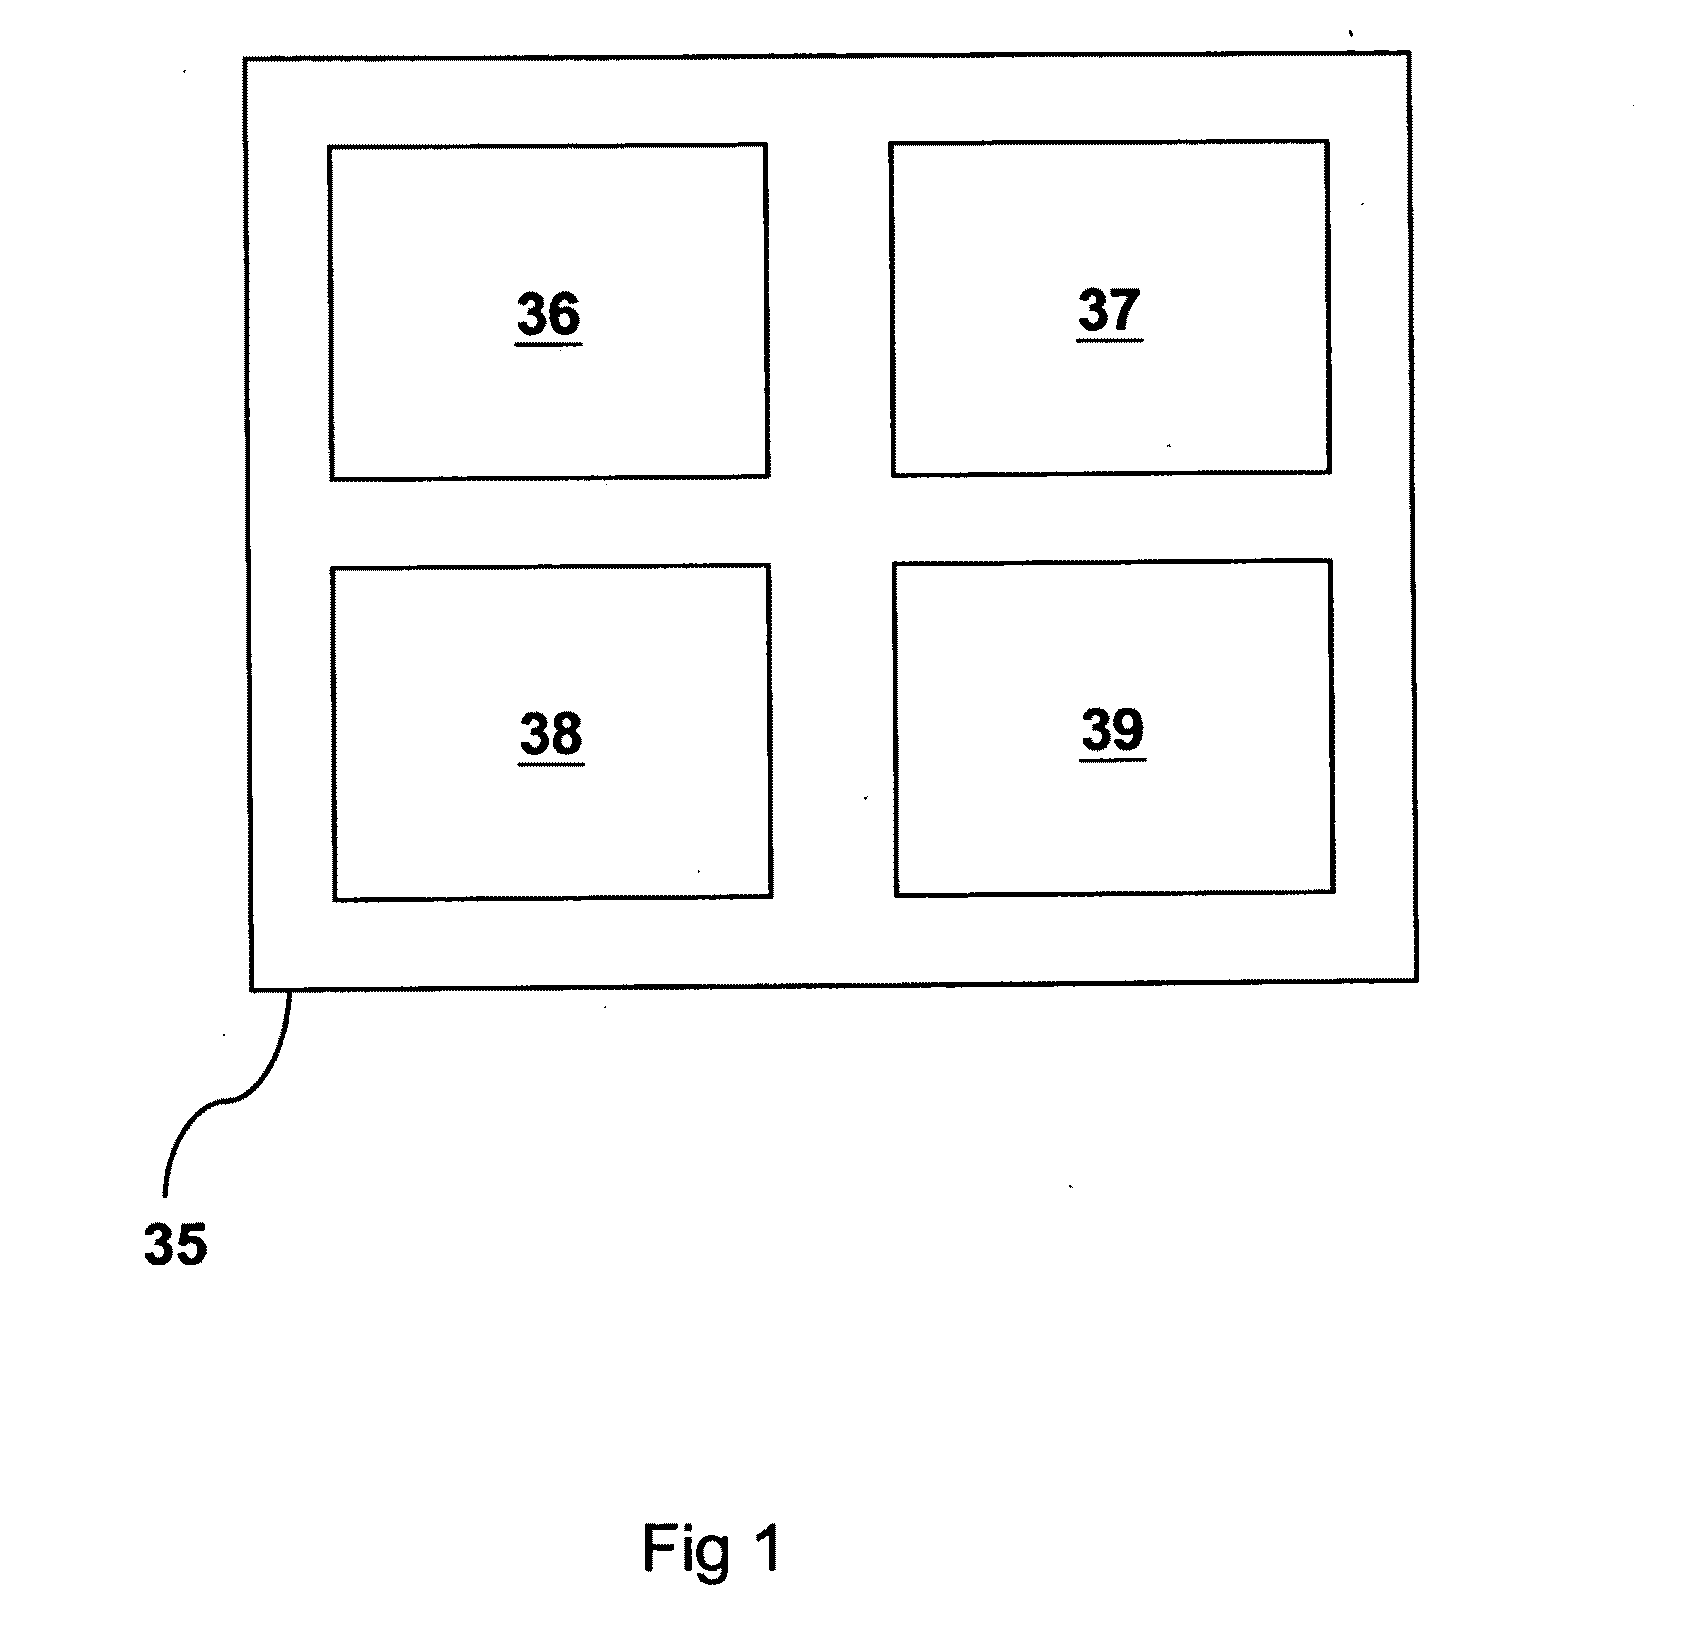 System and Method of Segmenting and Tagging Entities based on Profile Matching Using a Multi-Media Survey